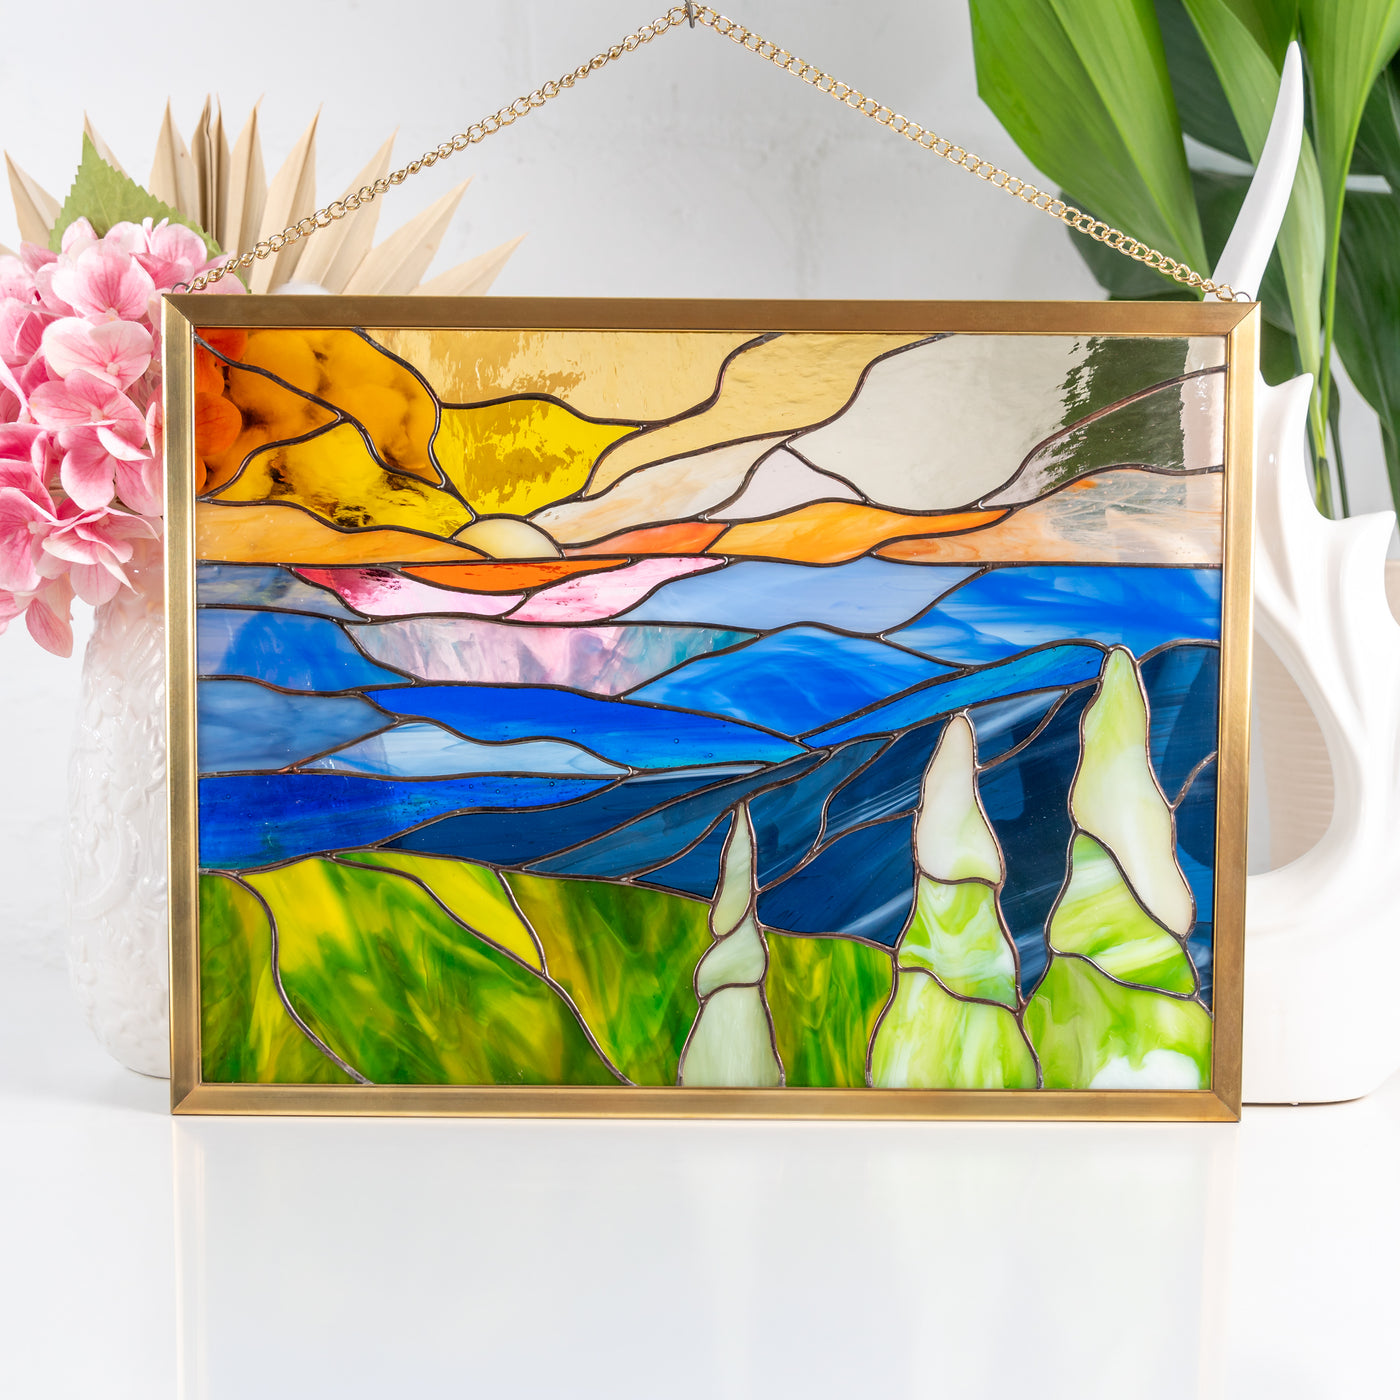 Blue Ridge mountains stained glass window hangings